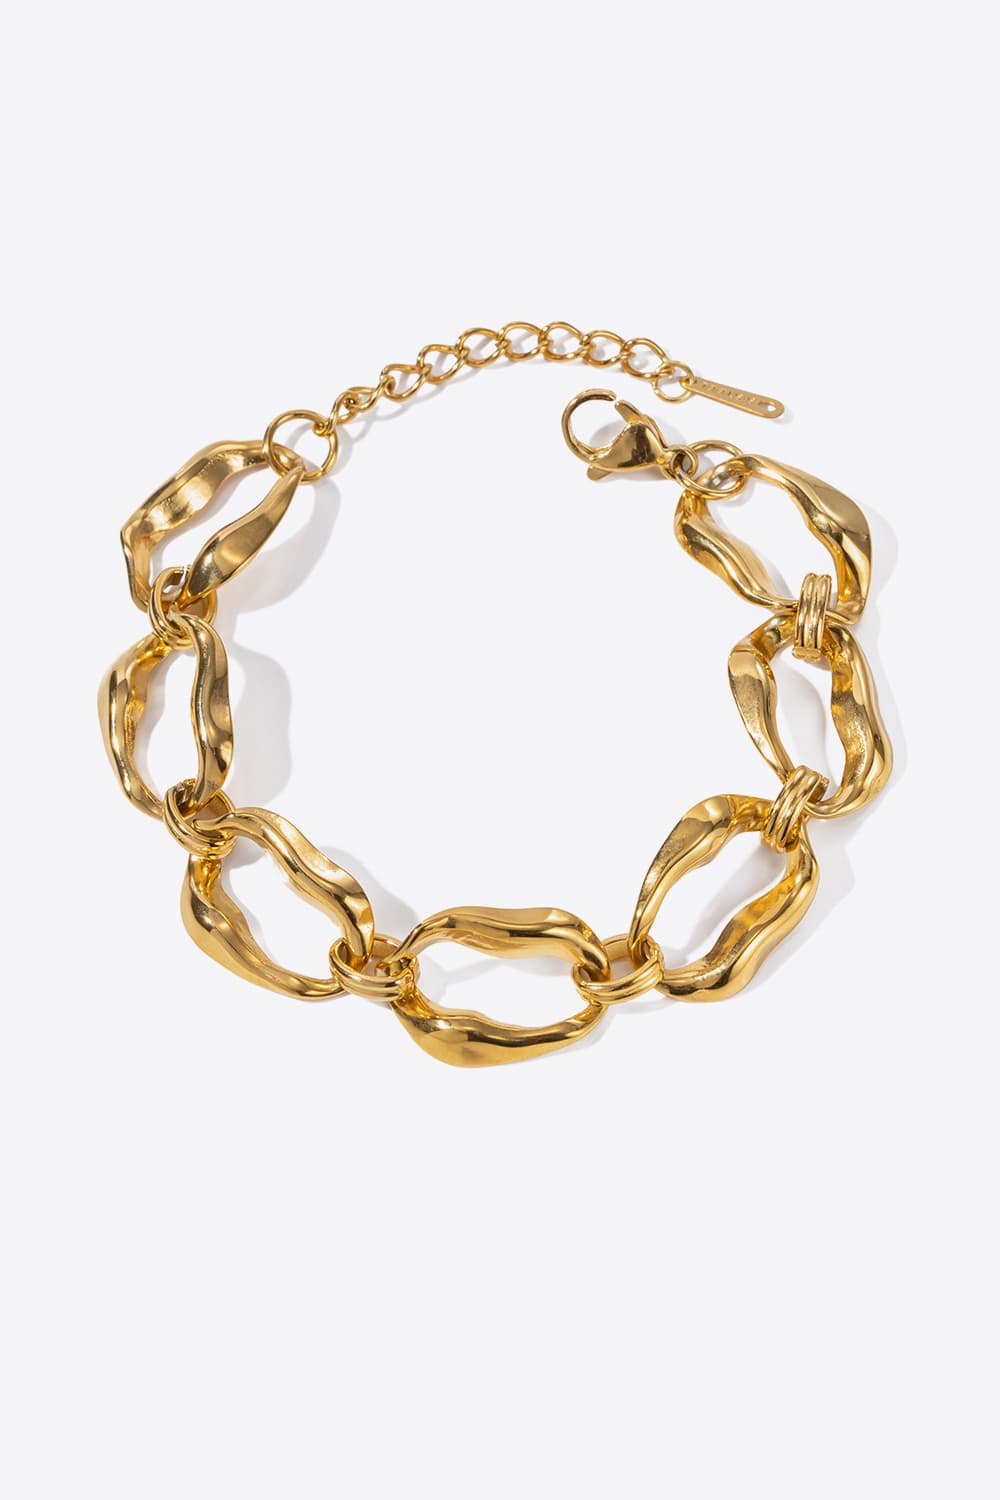 18K Gold-Plated Stainless Steel Bracelet - Bracelet - Wild Willows Boutique - Massapequa, NY, affordable and fashionable clothing for women of all ages. Bottoms, tops, dresses, intimates, outerwear, sweater, shoes, accessories, jewelry, active wear, and more // Wild Willow Boutique.